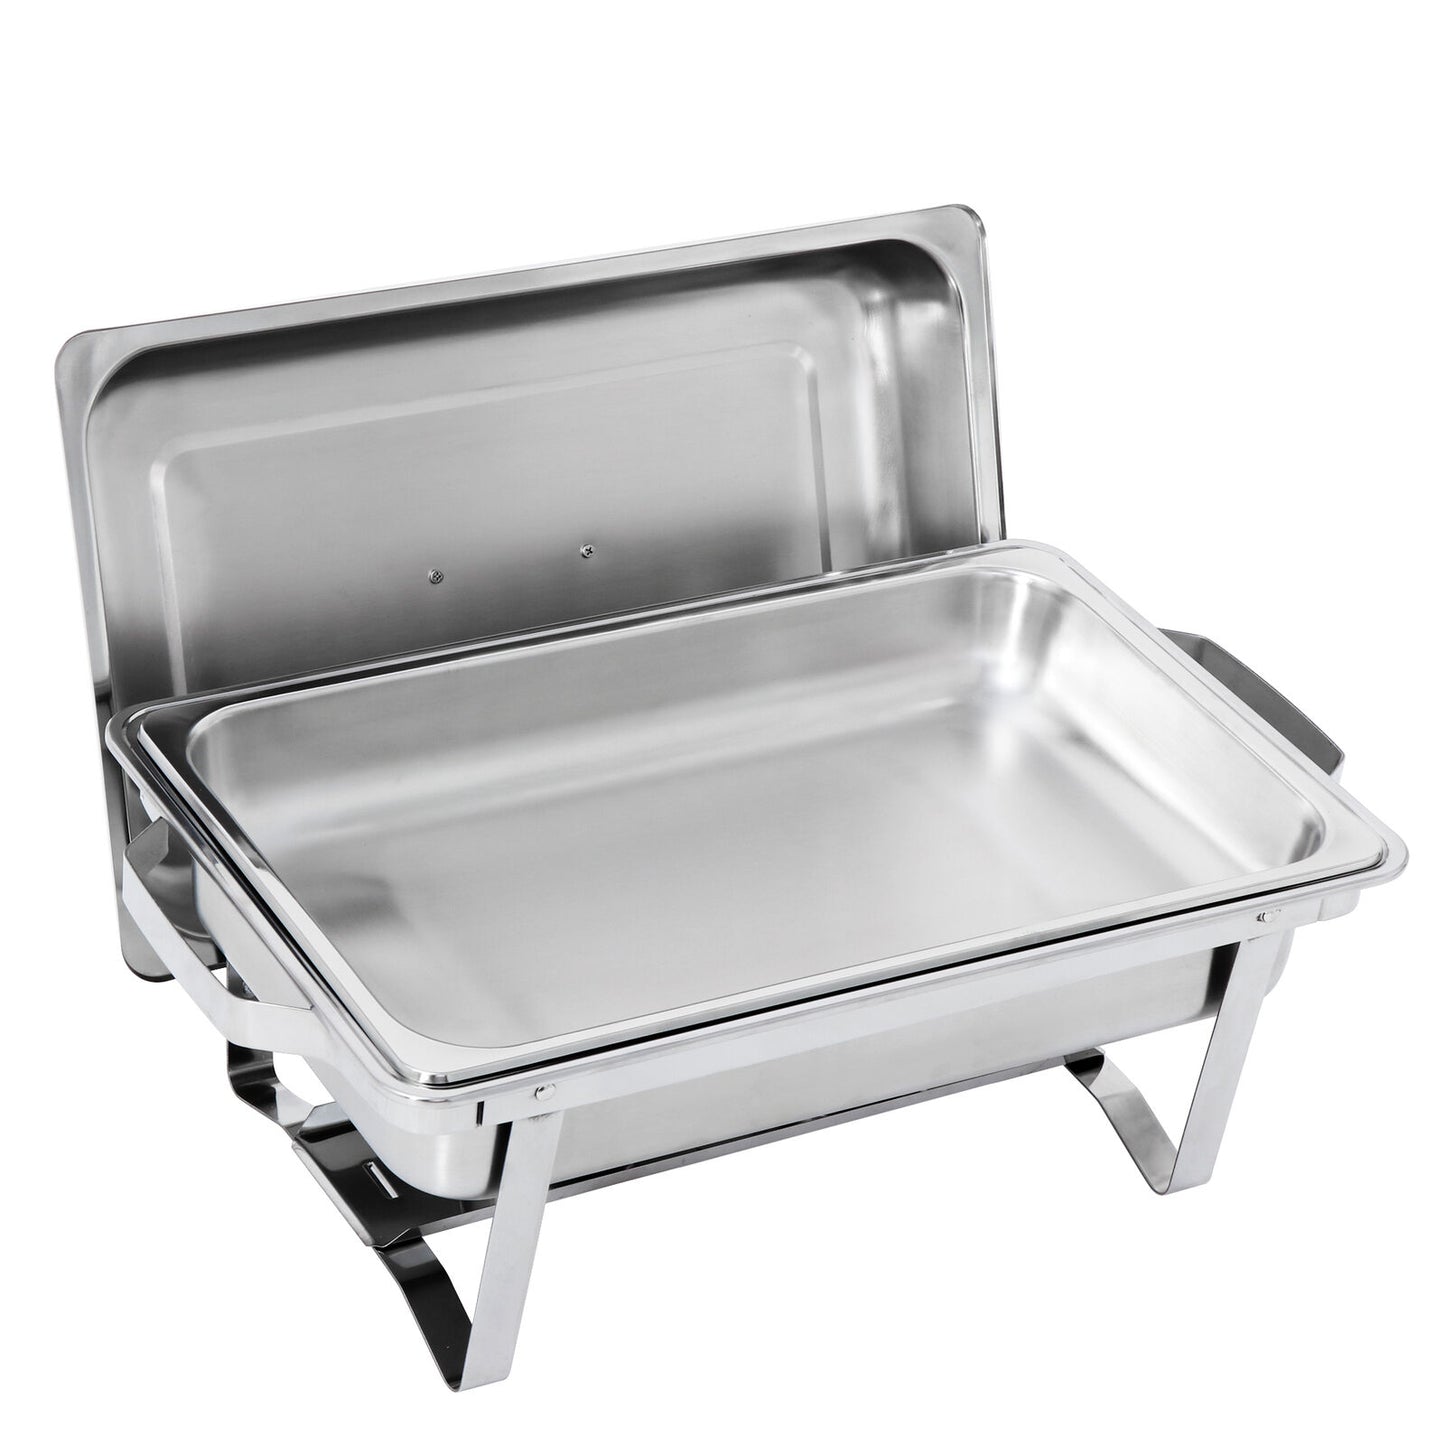 4 Pack 8QT Chafing Dish Stainless Steel Chafer Complete Set with Warmer